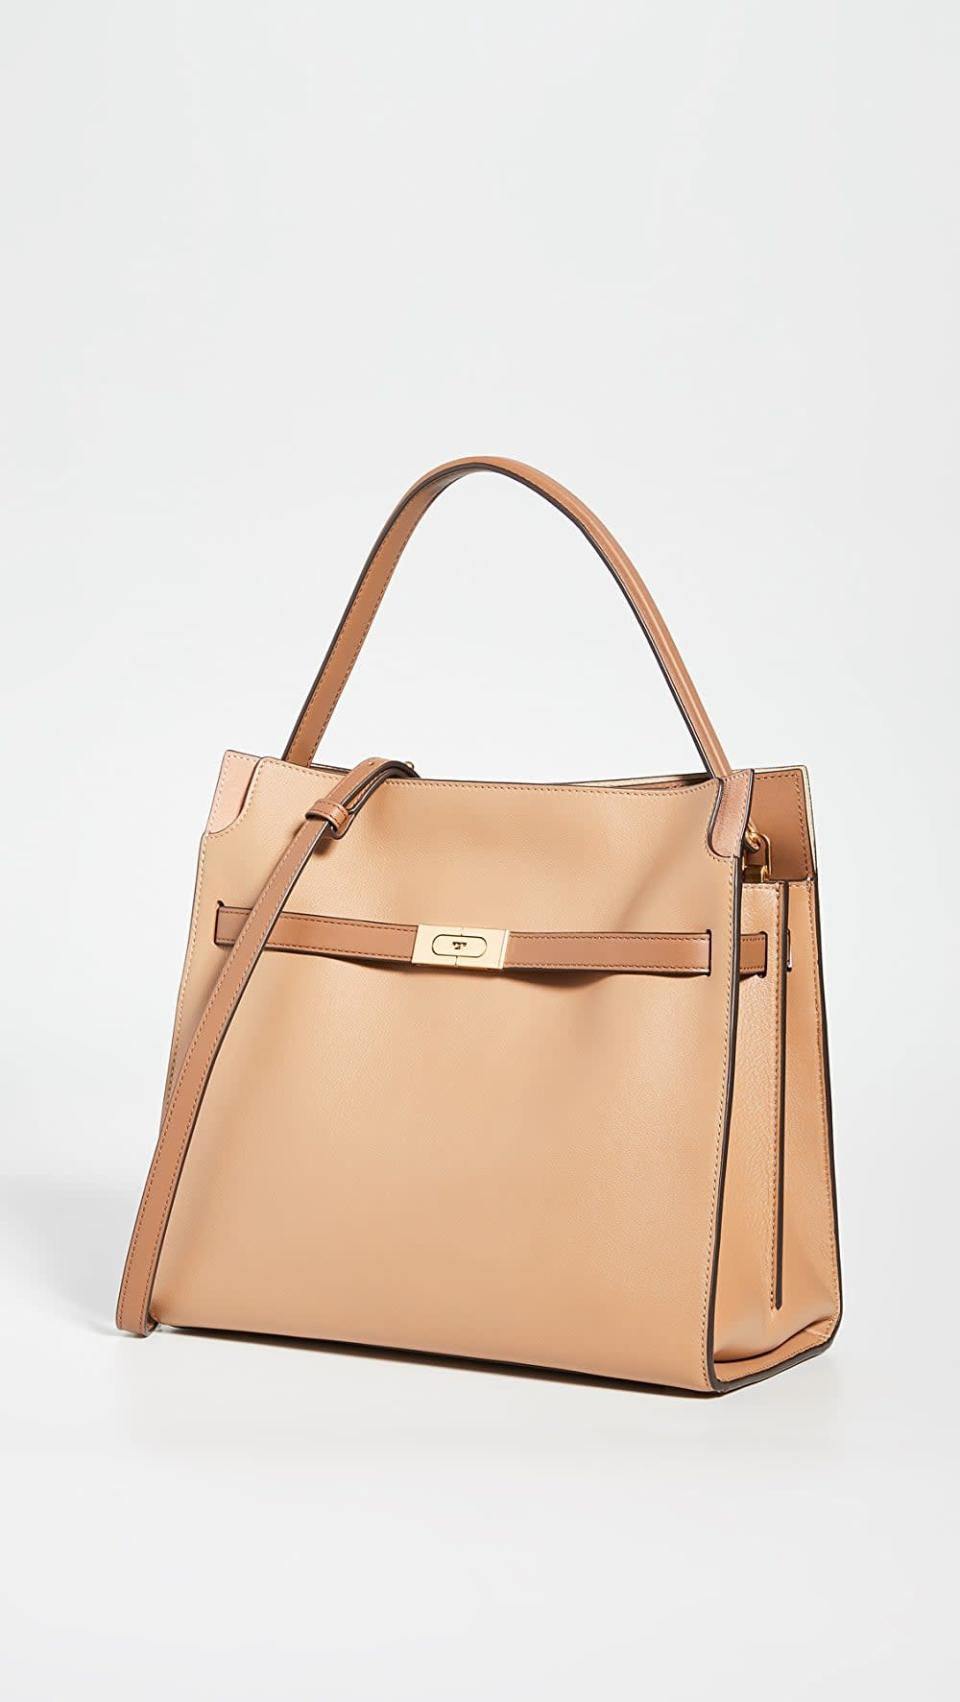 <p>This <span>Tory Burch Lee Radziwill Double Bag</span> ($1,098) will make you feel like a boss. It's as classic as it gets.</p>